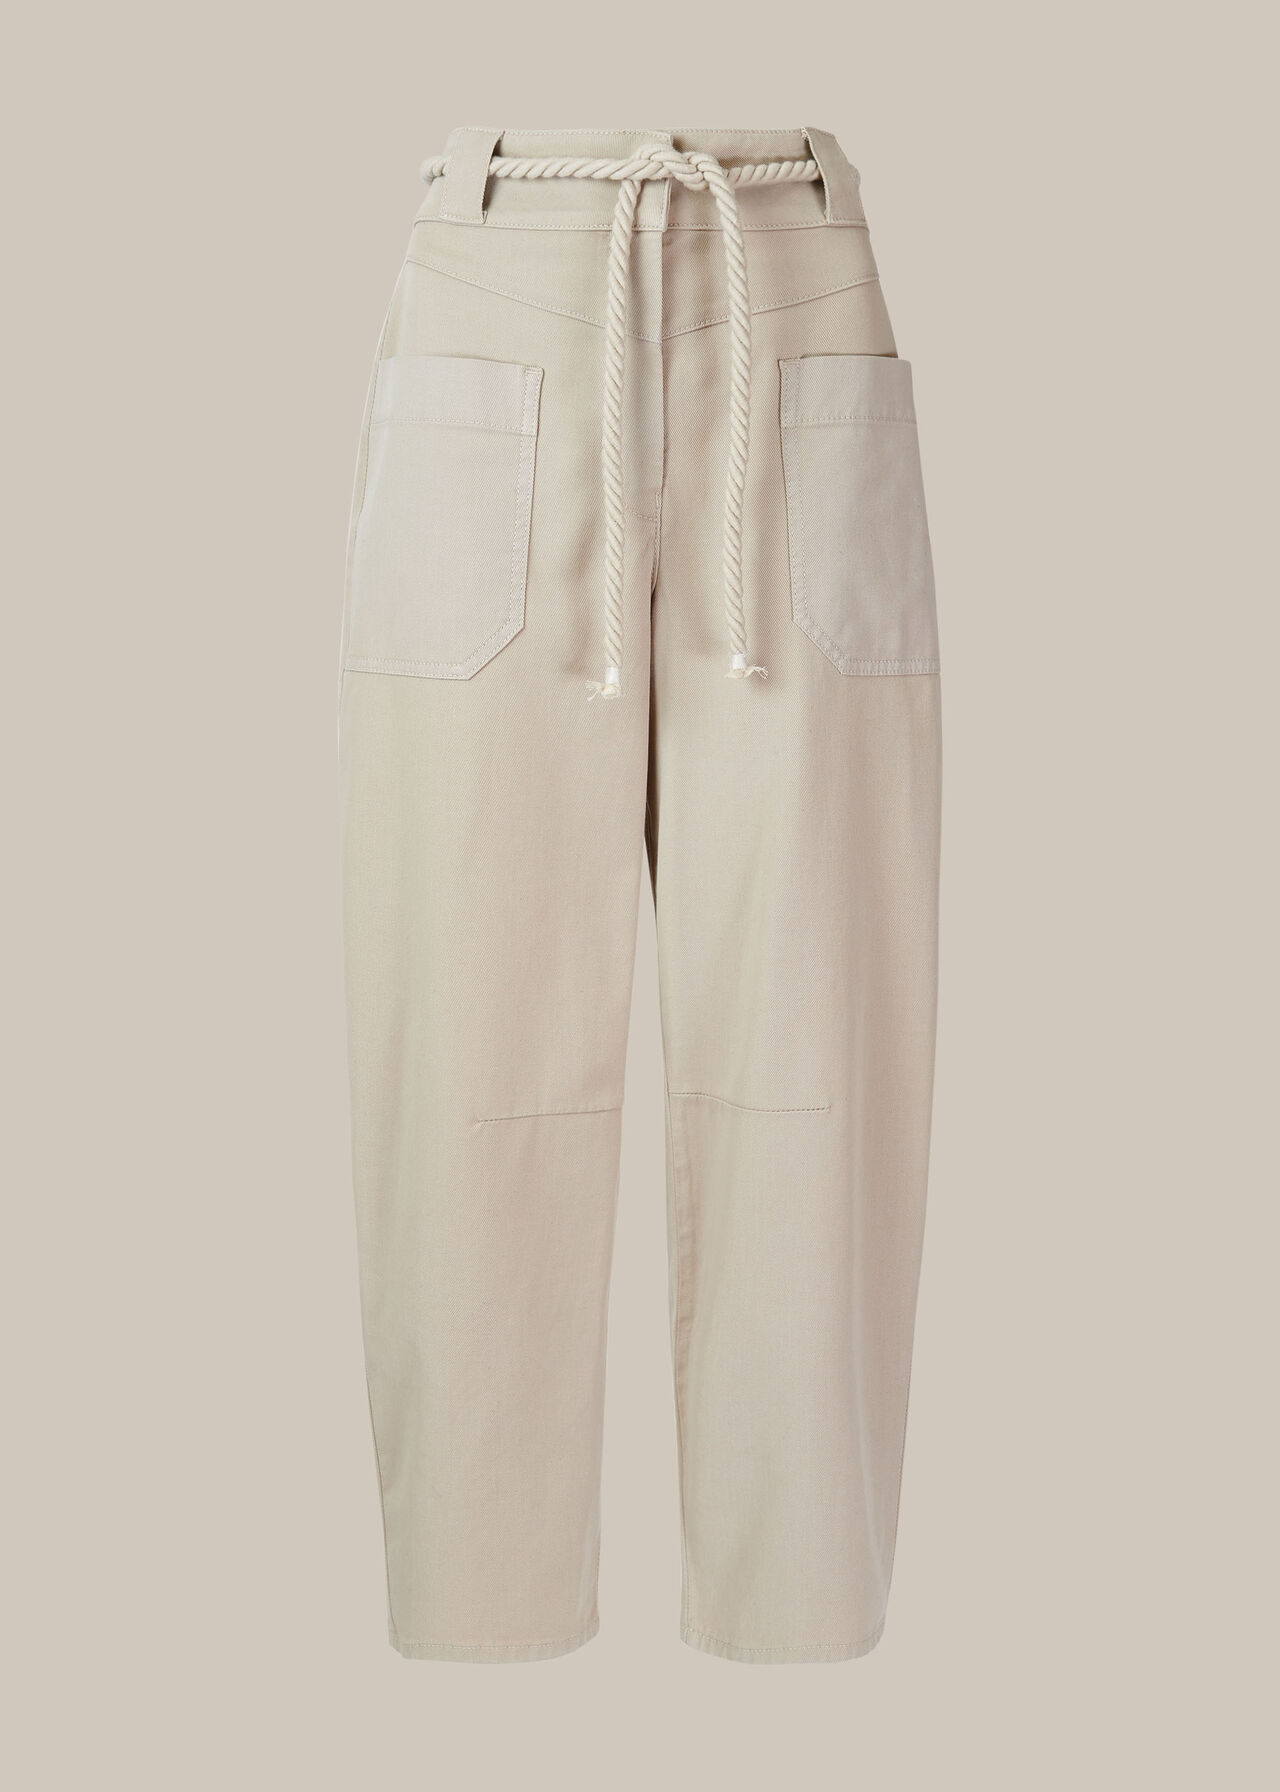 Beige Rope Belted Casual Trouser, WHISTLES